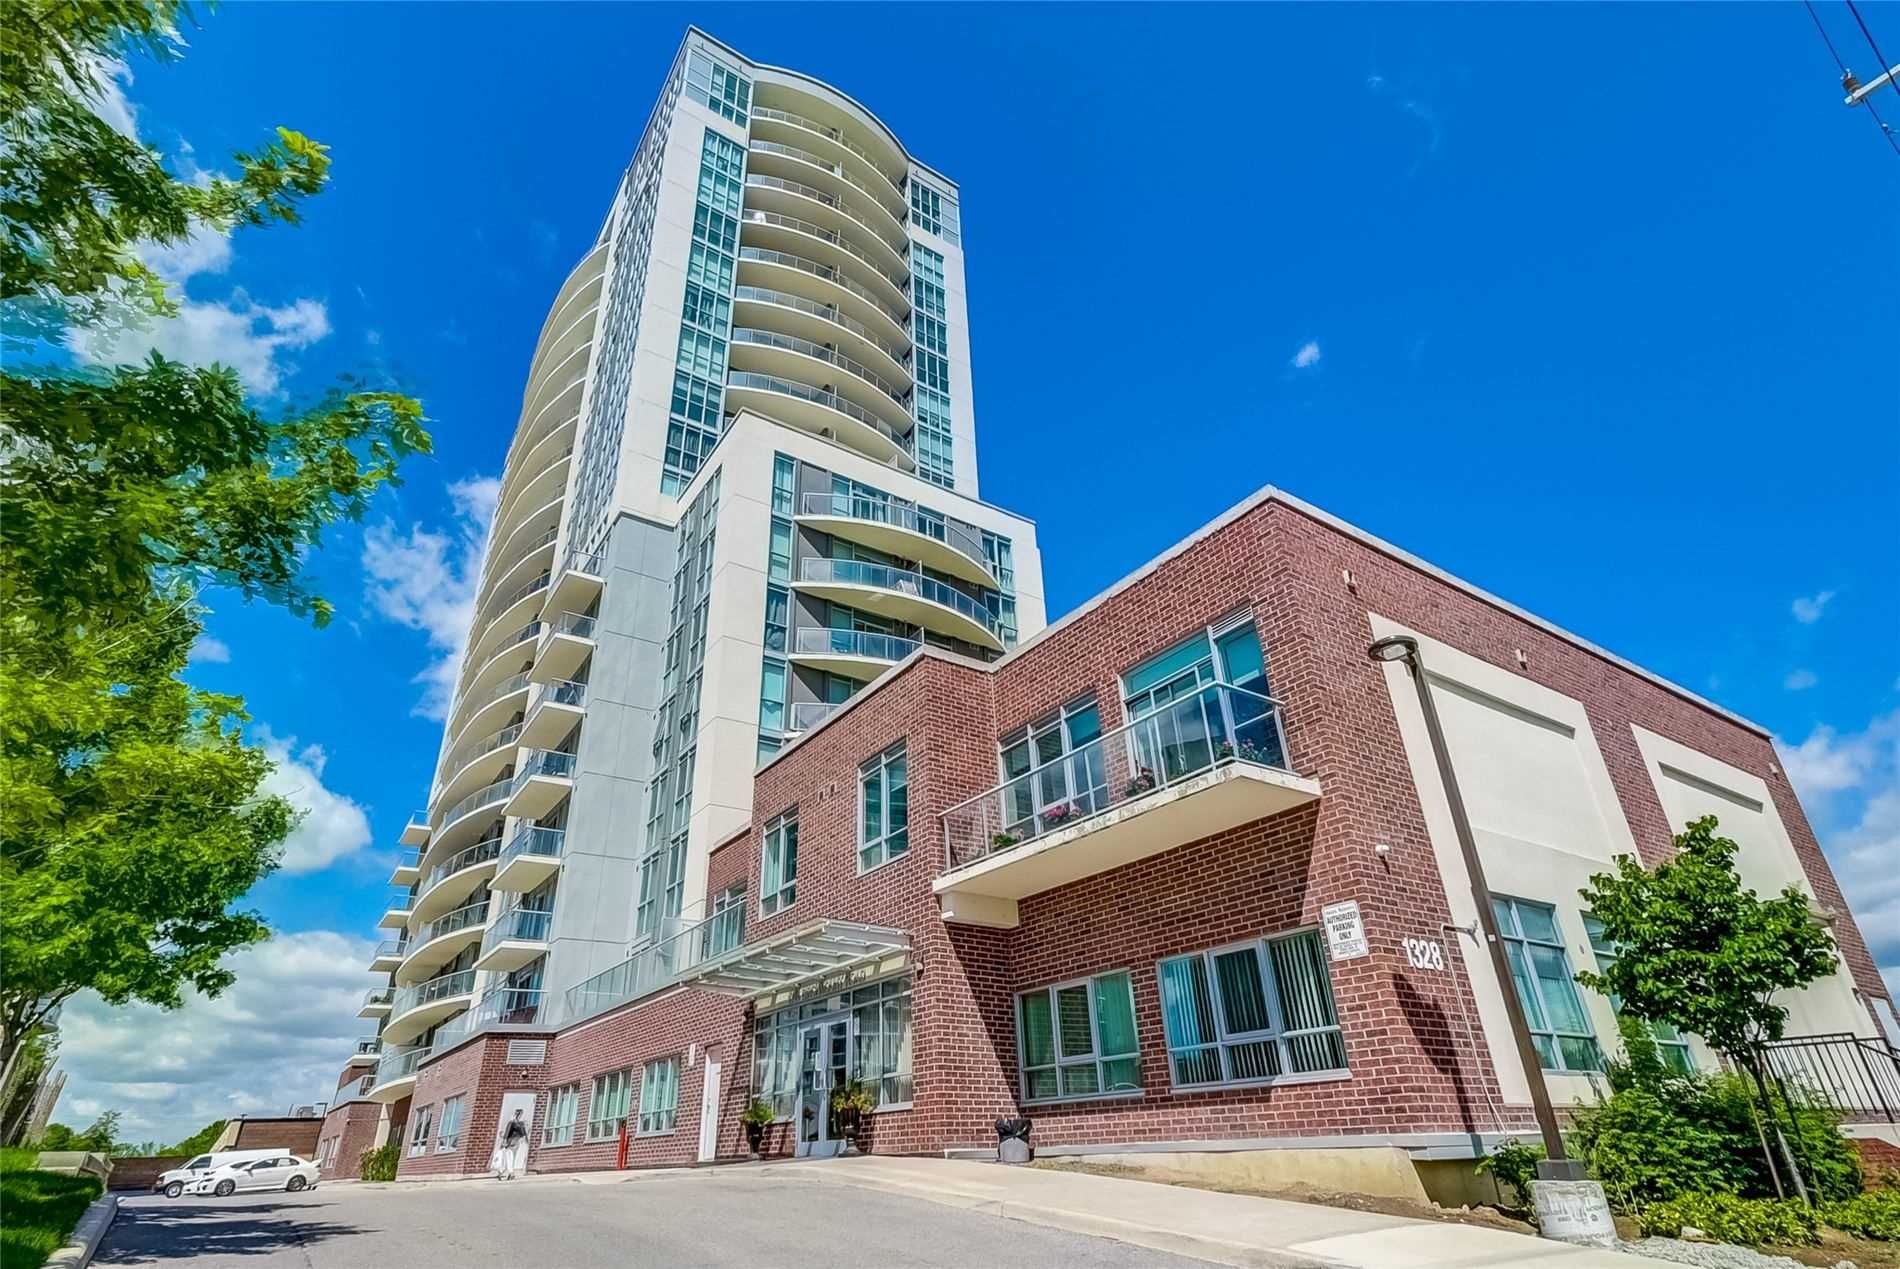 1328 Birchmount Rd. This condo at 2150 Condos is located in  Scarborough, Toronto - image #1 of 2 by Strata.ca